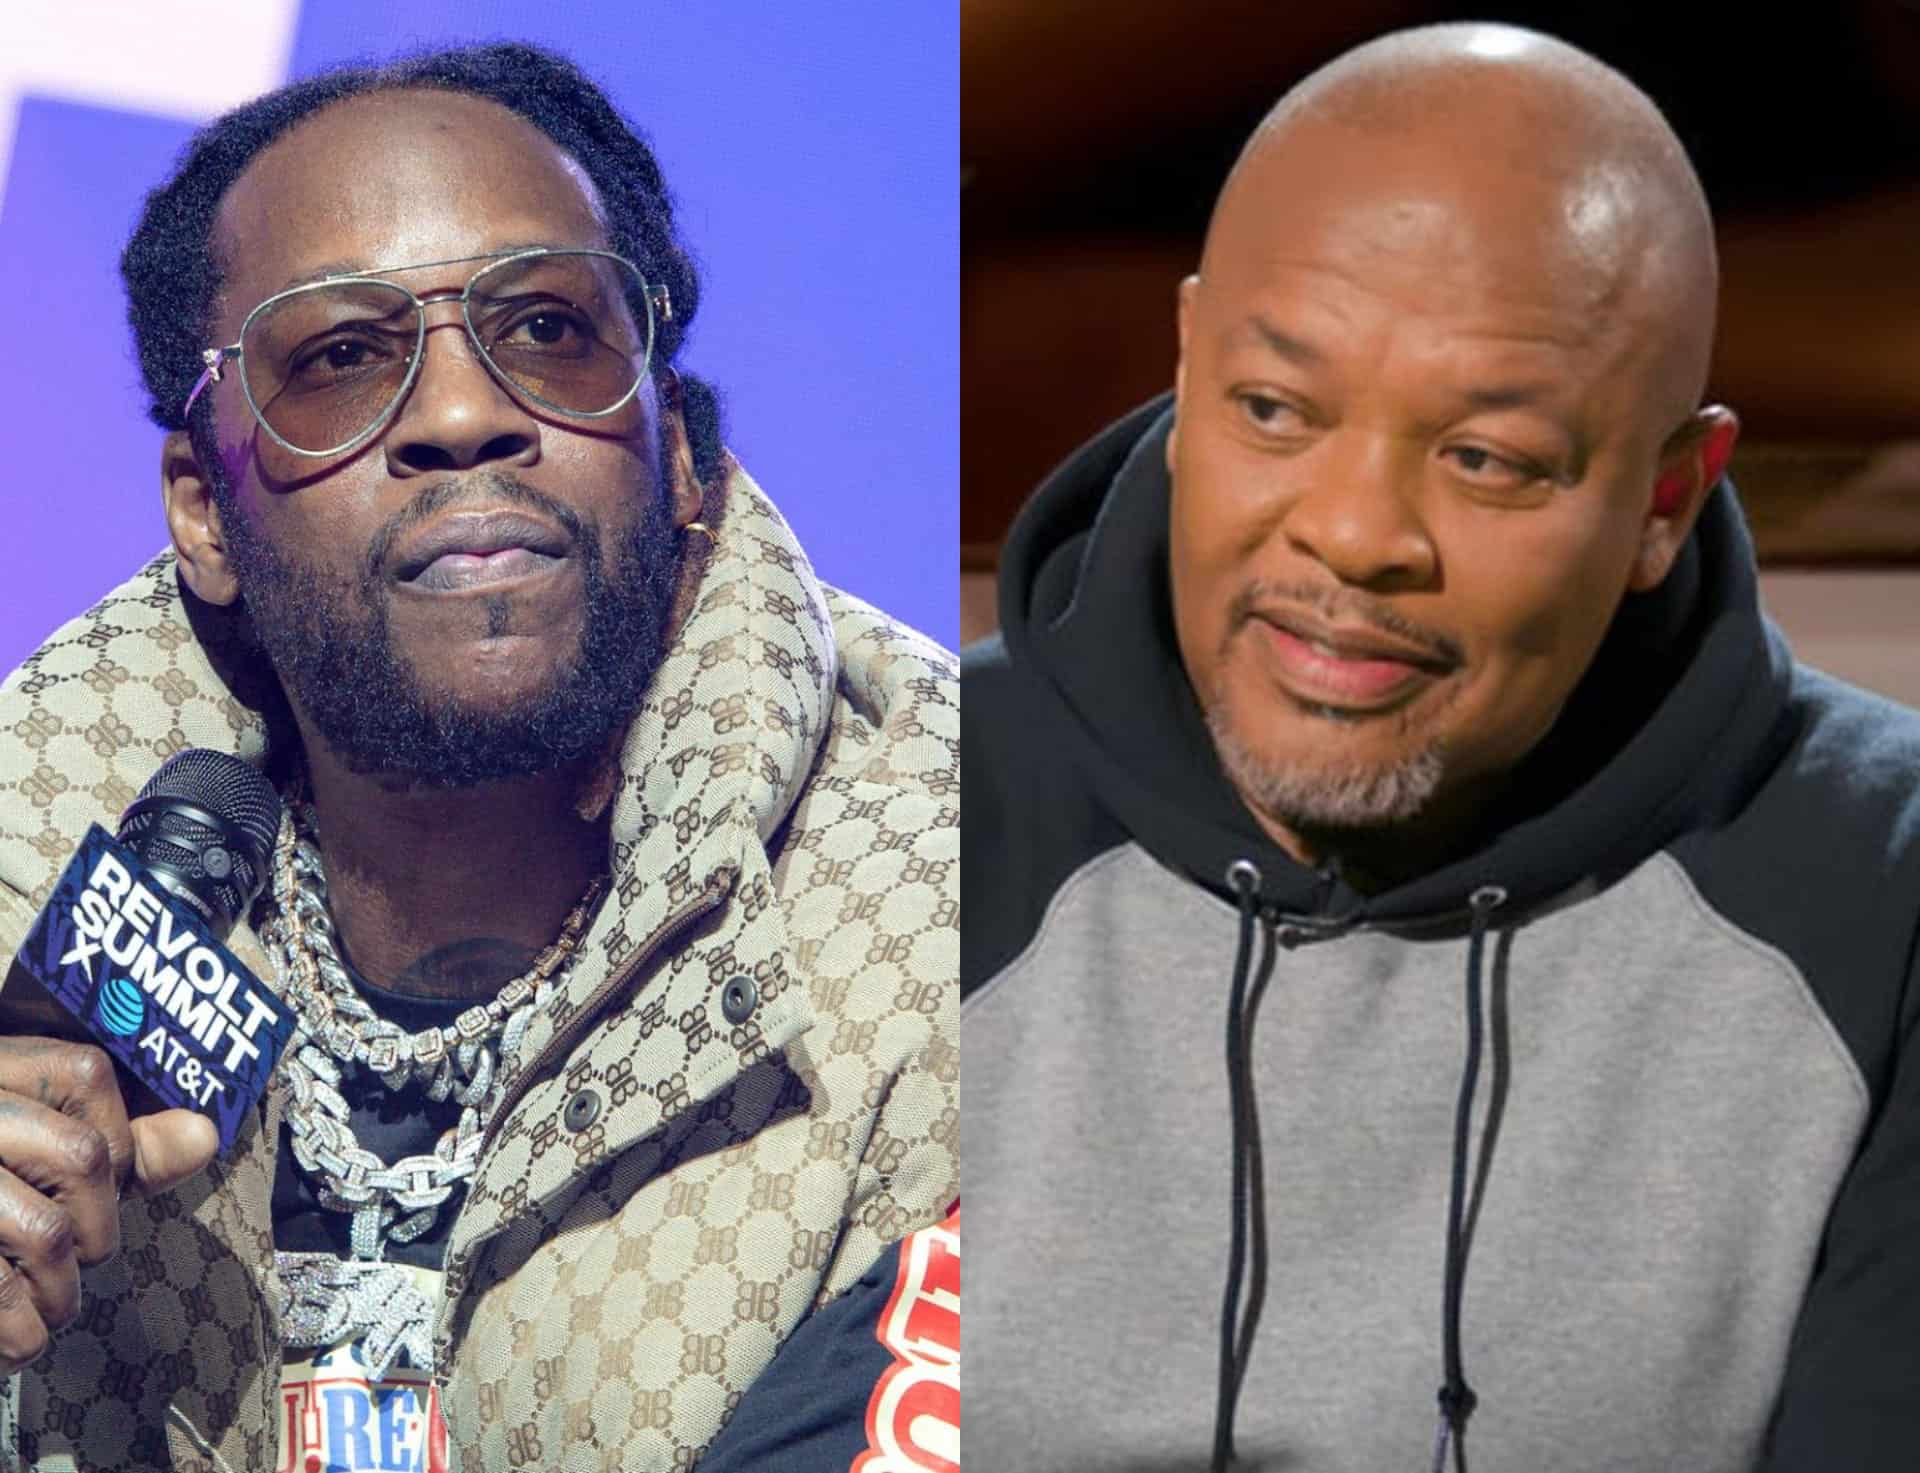 2 Chainz Says Dr. Dre Worked Him The Hardest It Was Such A Great Experience